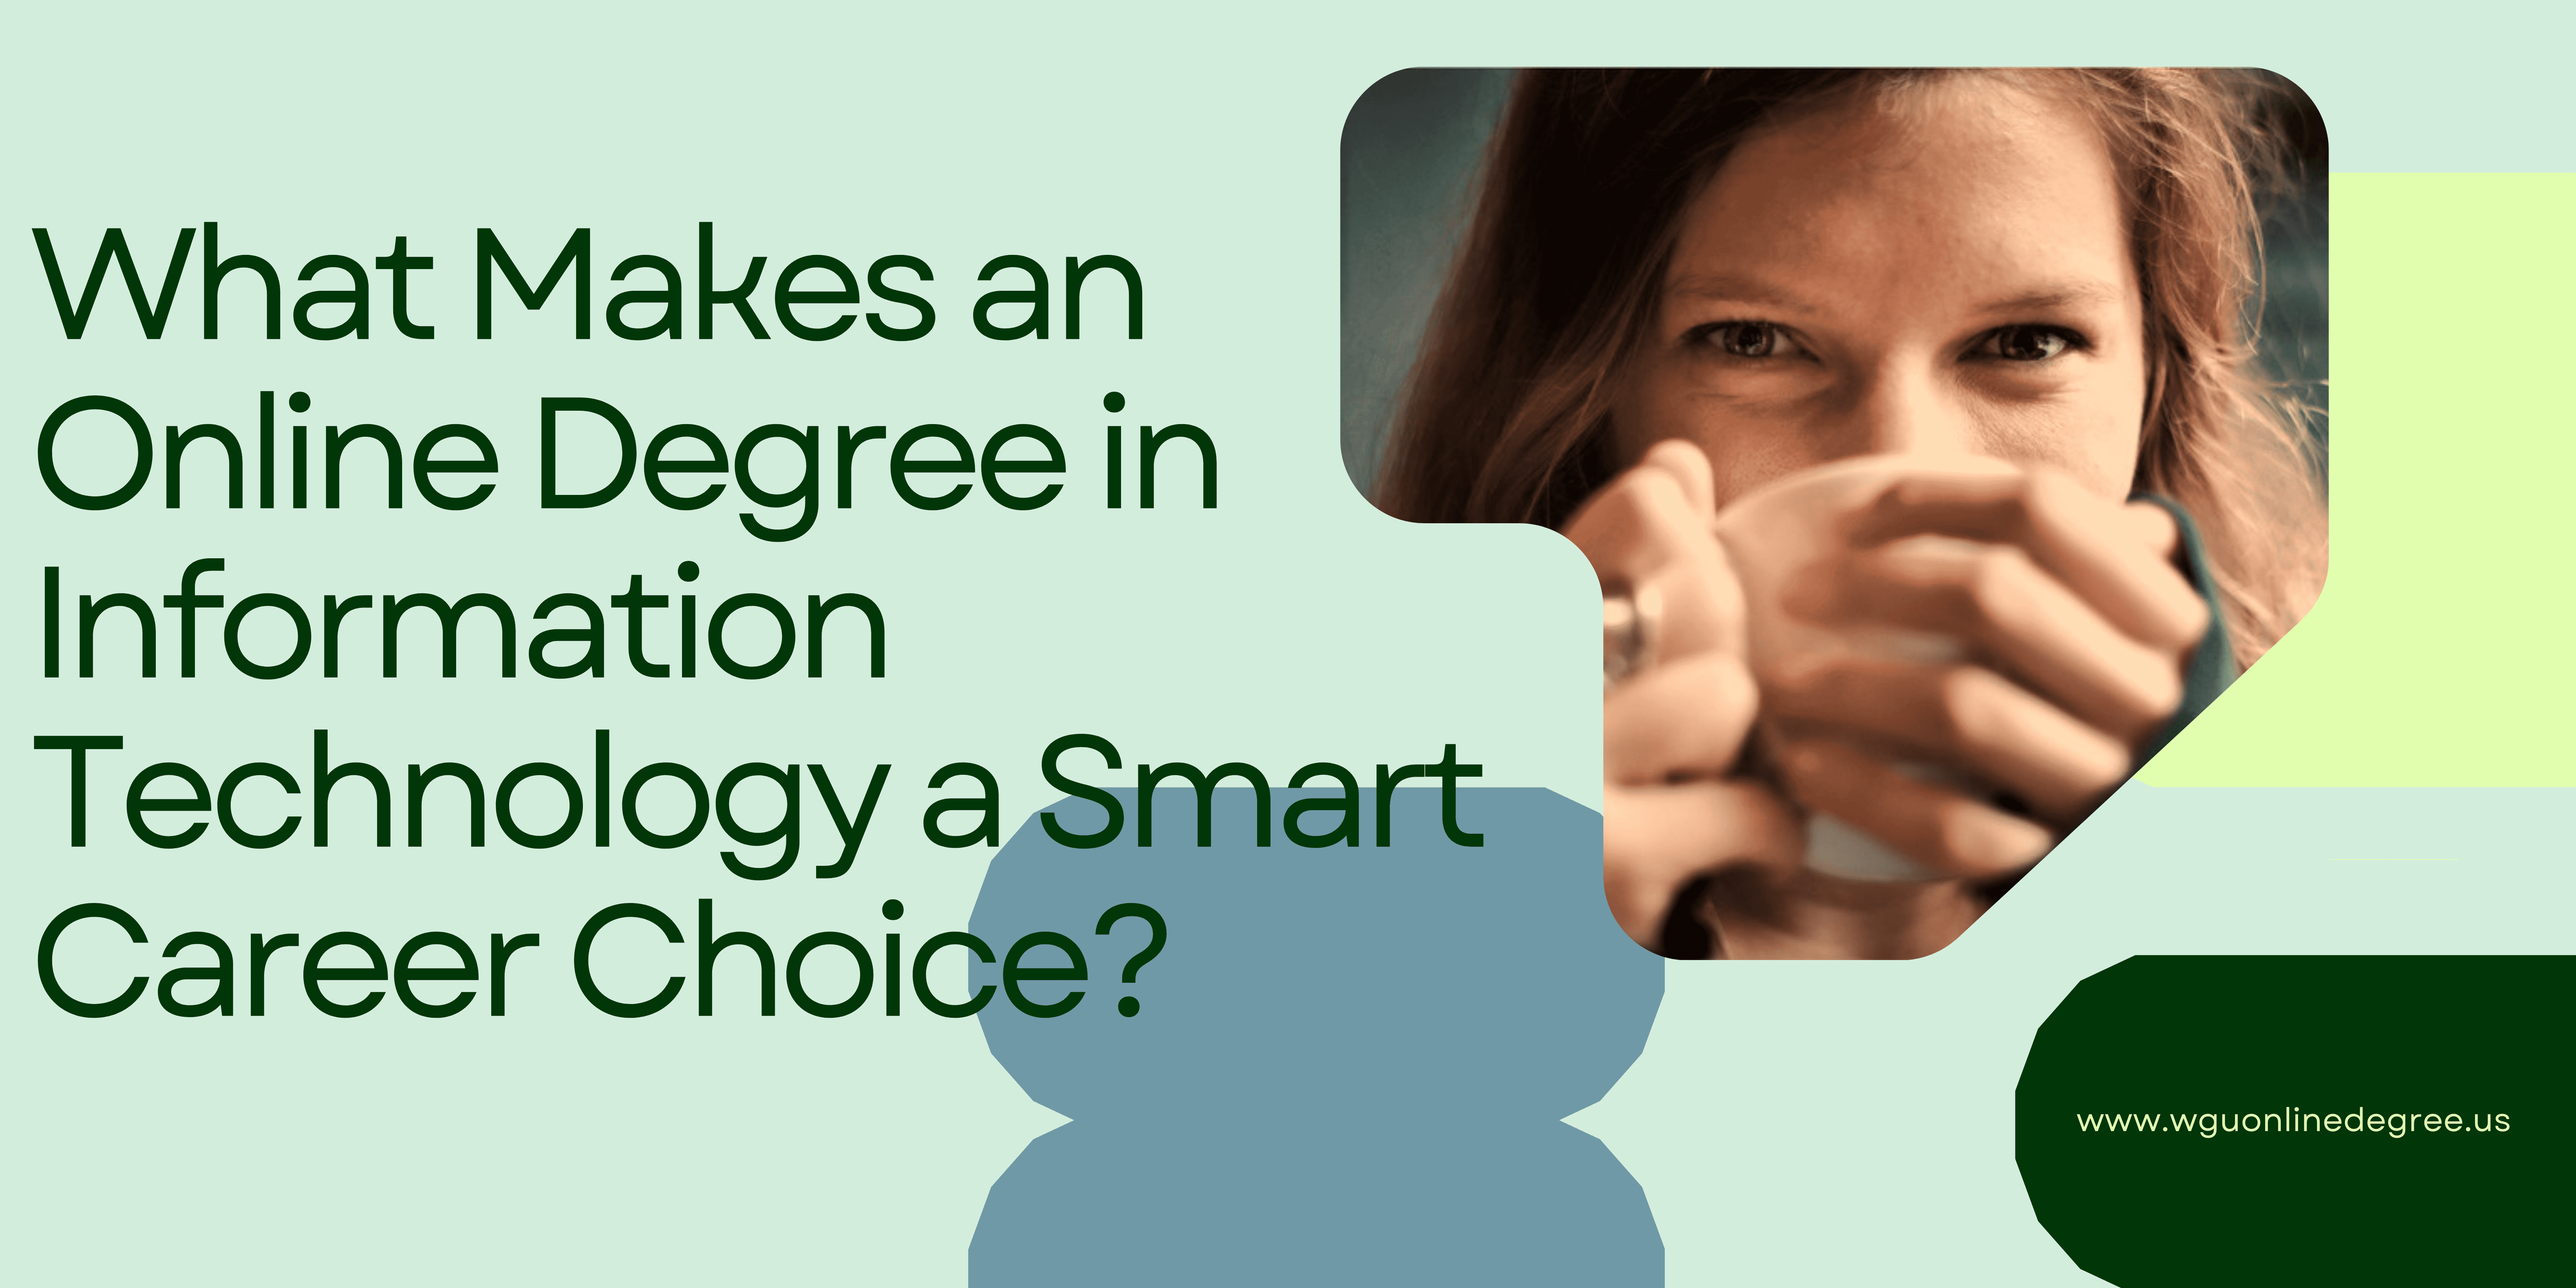 What Makes an Online Degree in Information Technology a Smart Career Choice?